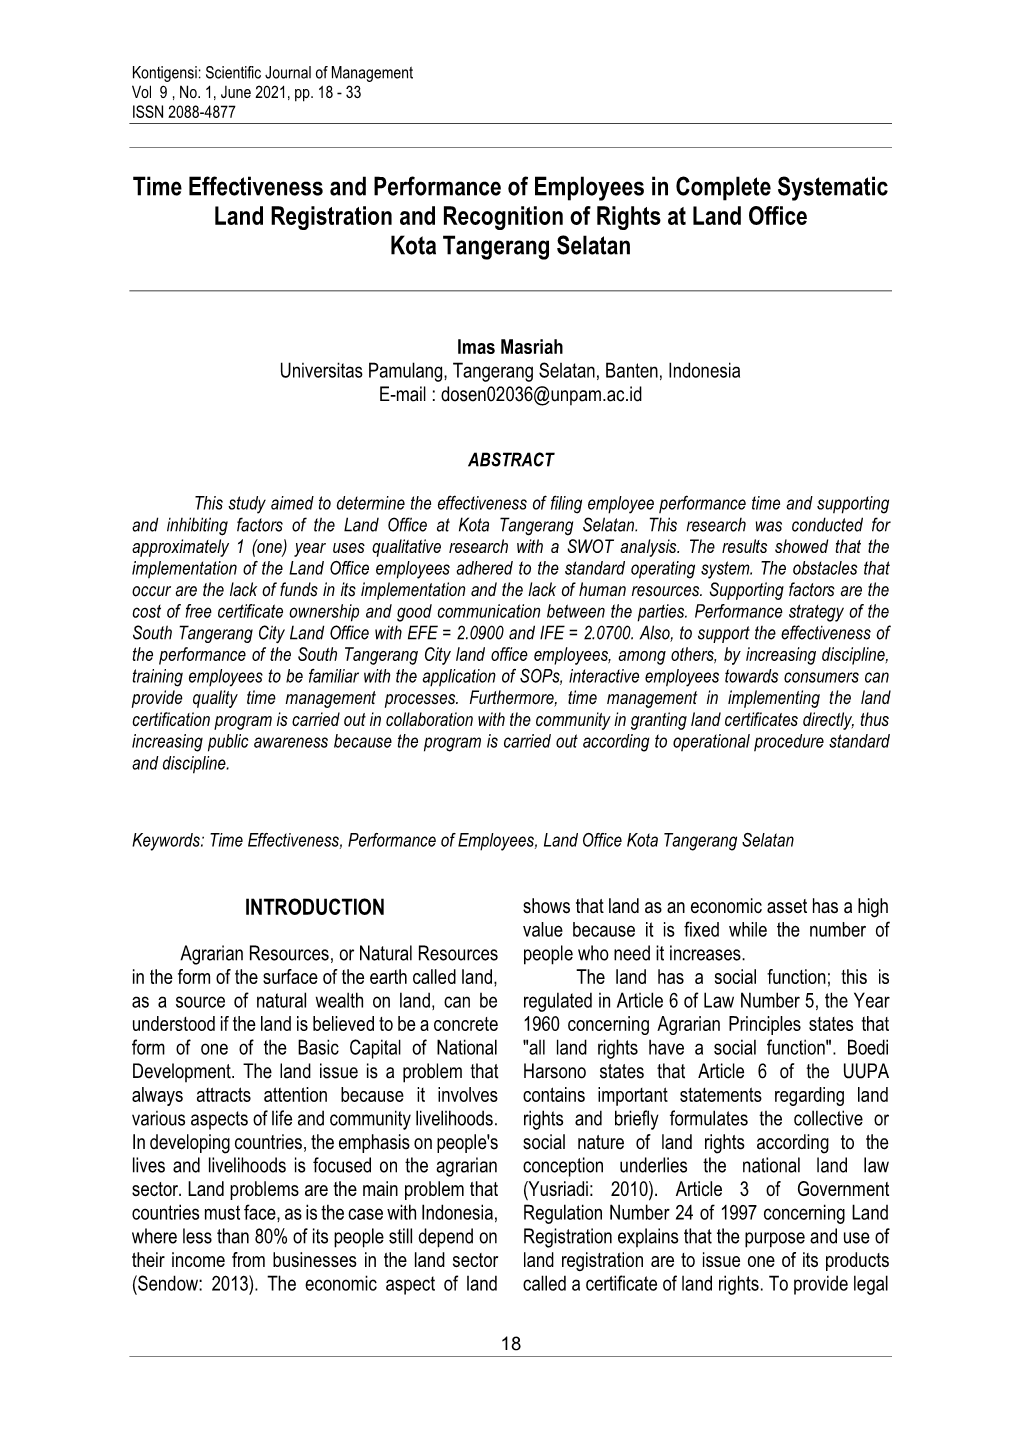 Time Effectiveness and Performance of Employees in Complete Systematic Land Registration and Recognition of Rights at Land Office Kota Tangerang Selatan